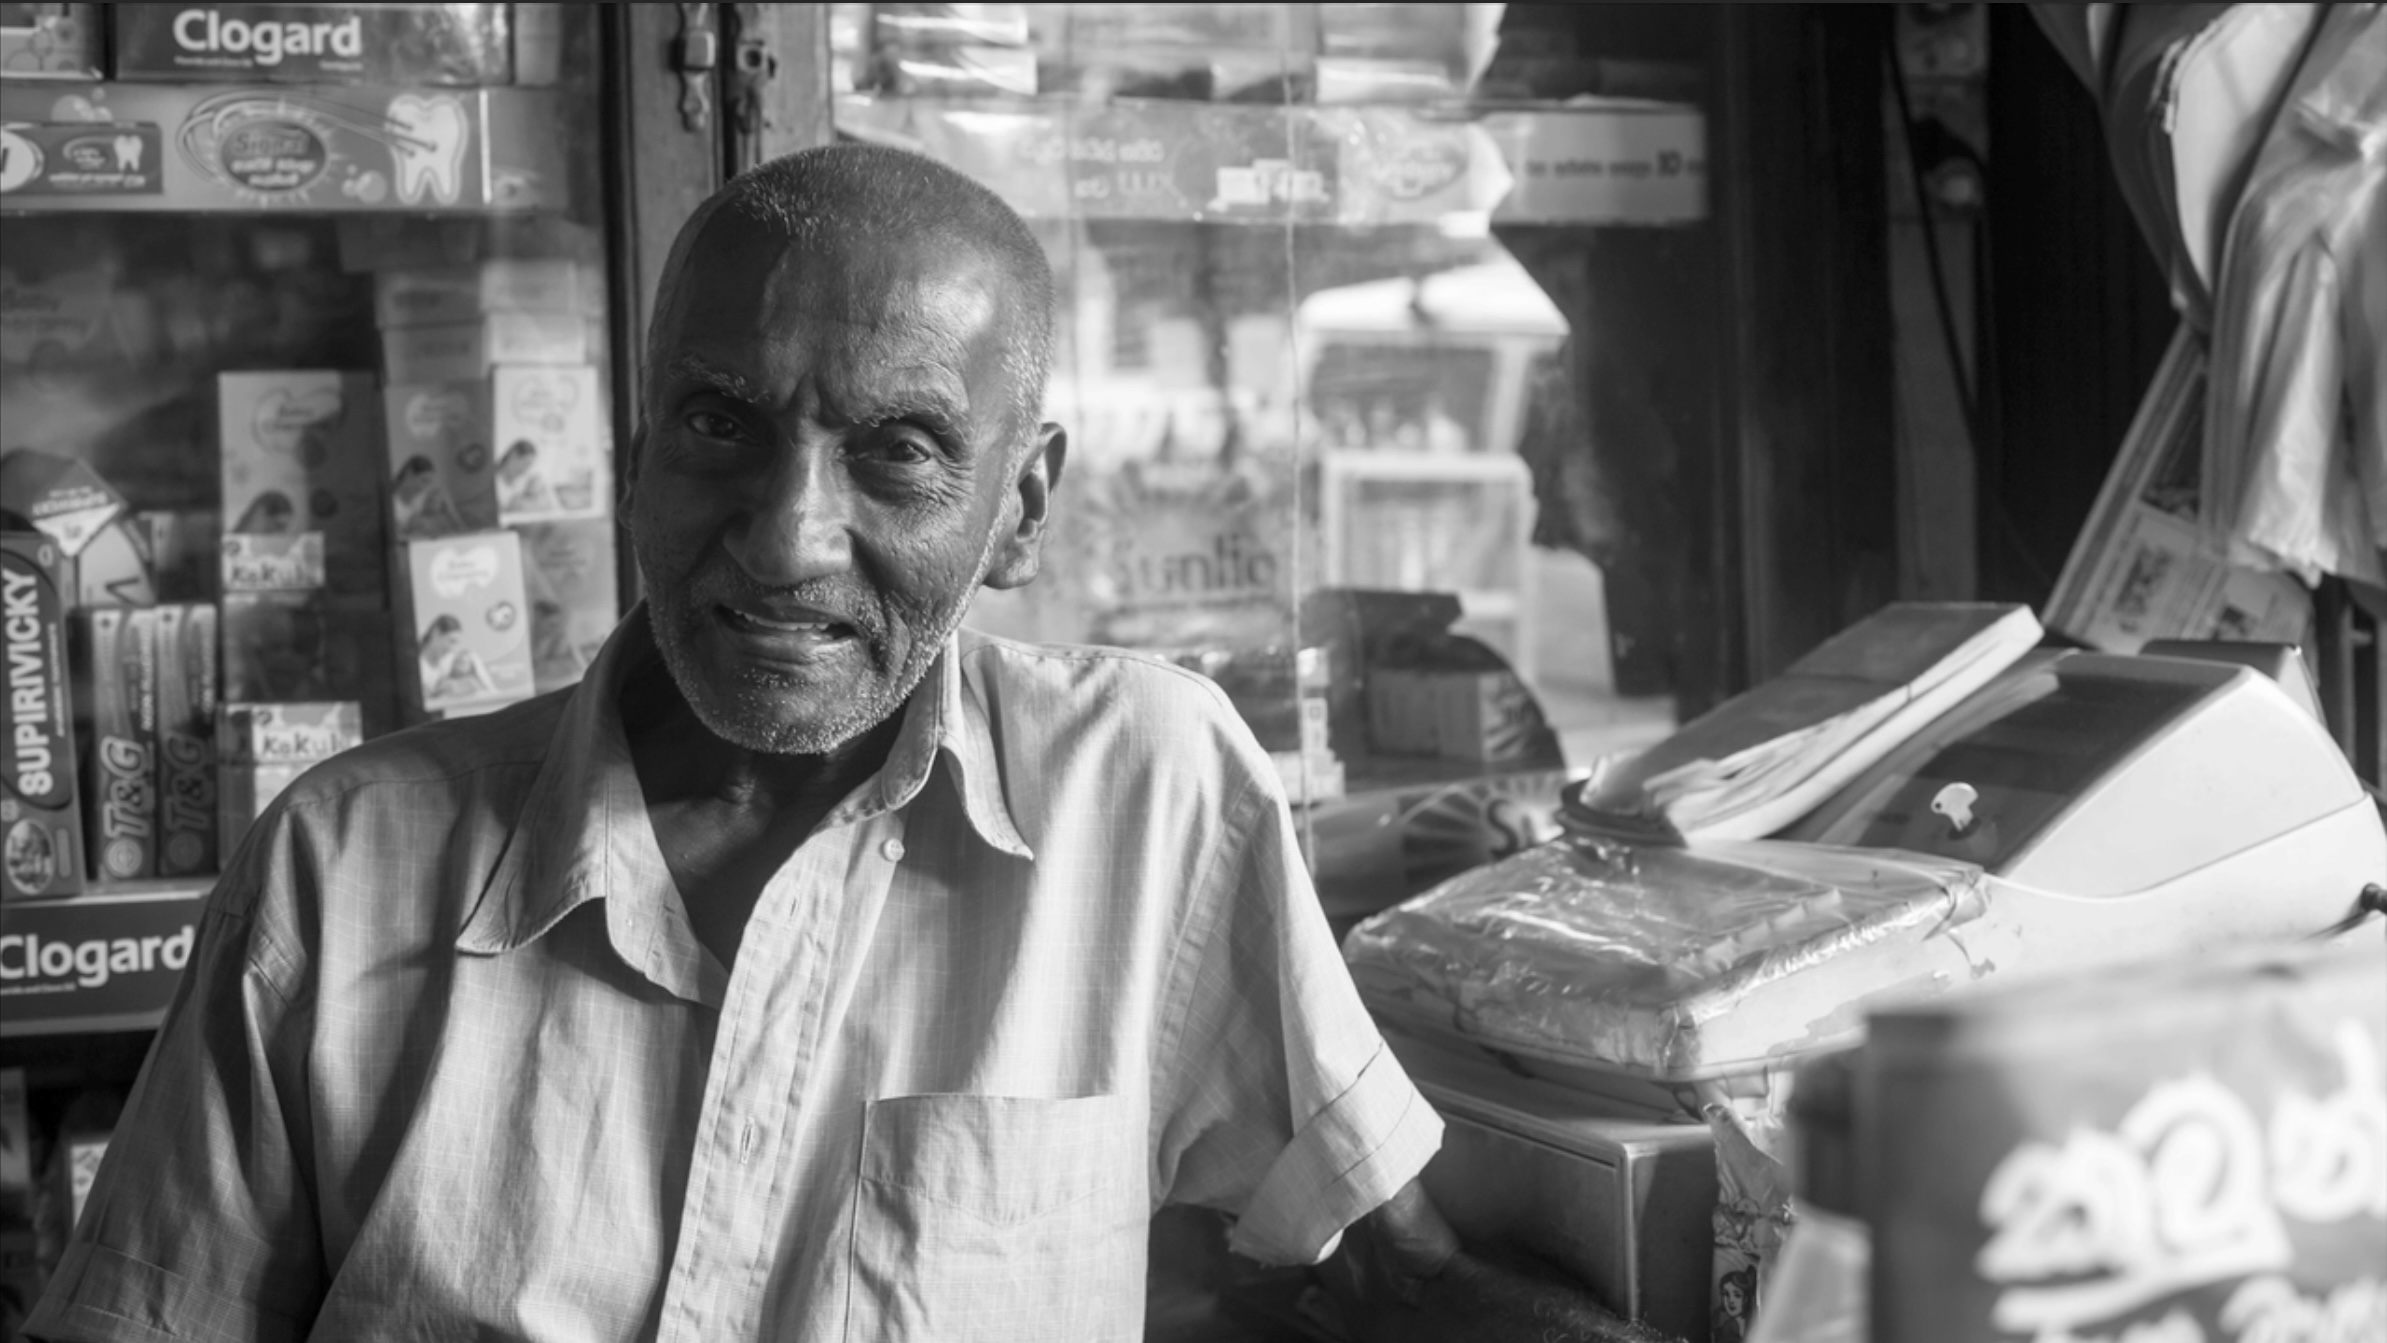 Lawrence Saravanamuttu’s grandfather Soosaipillai came to Negombo from his hometown of Jaffna to open the shop that would become famous for selling Jaffna cigars.